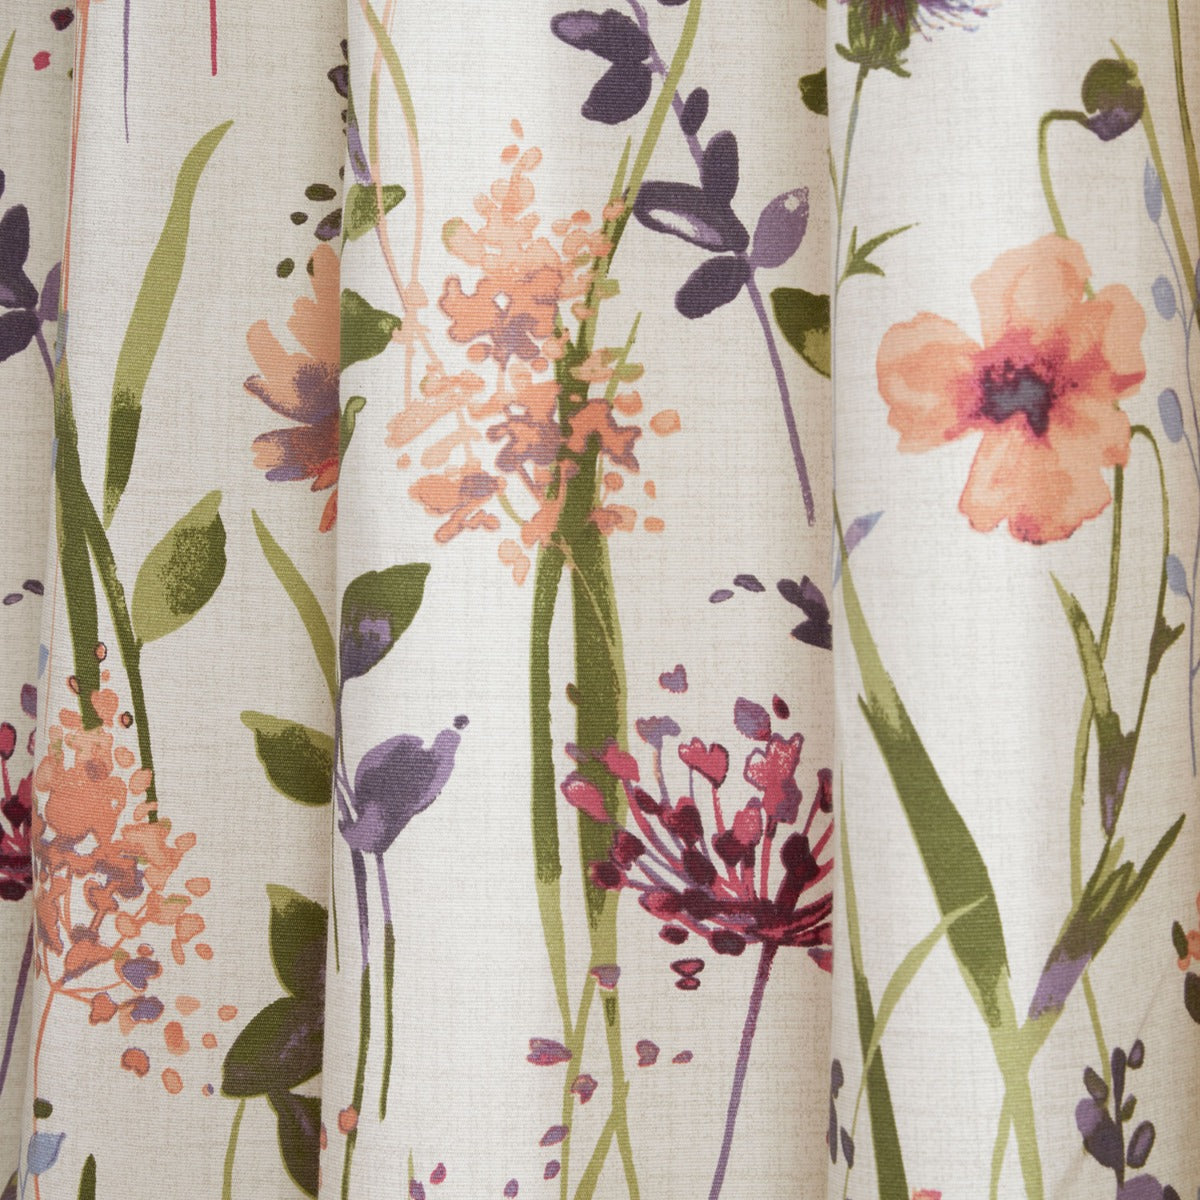 Hampshire Meadow Floral Lined Pencil Pleat Curtains